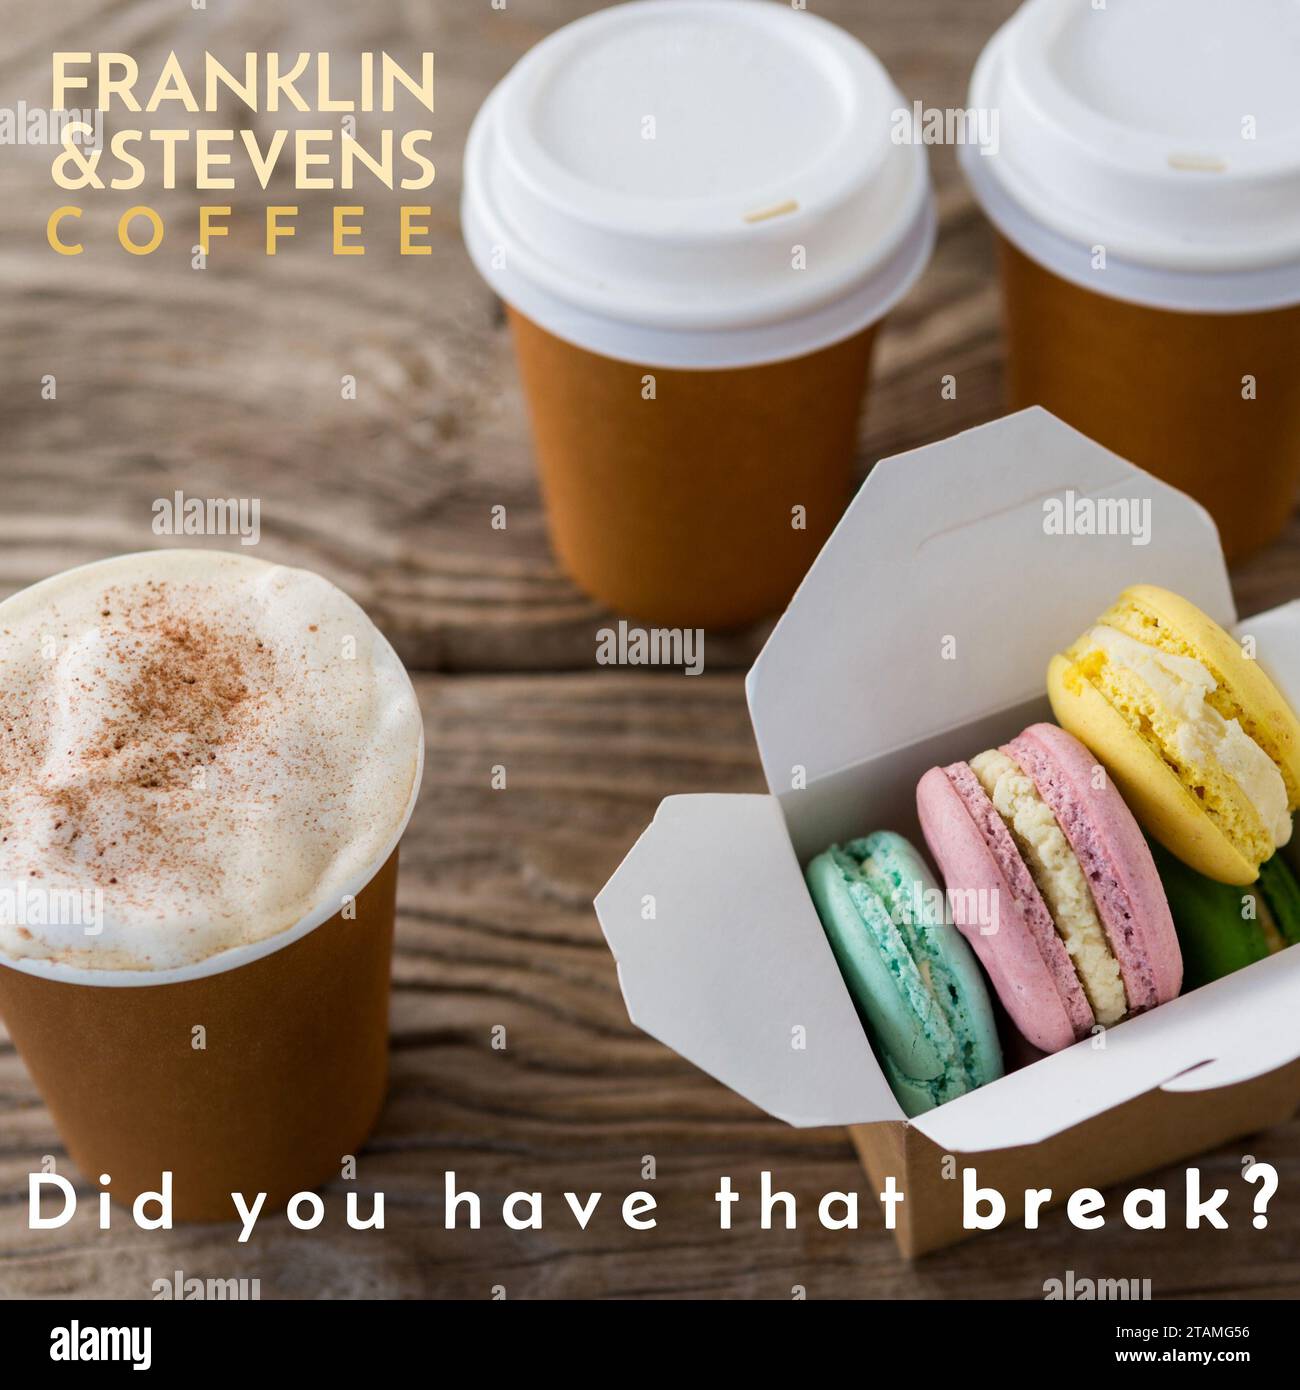 Composition of franklin and stevens coffee text over takeaway coffee and macaroons Stock Photo